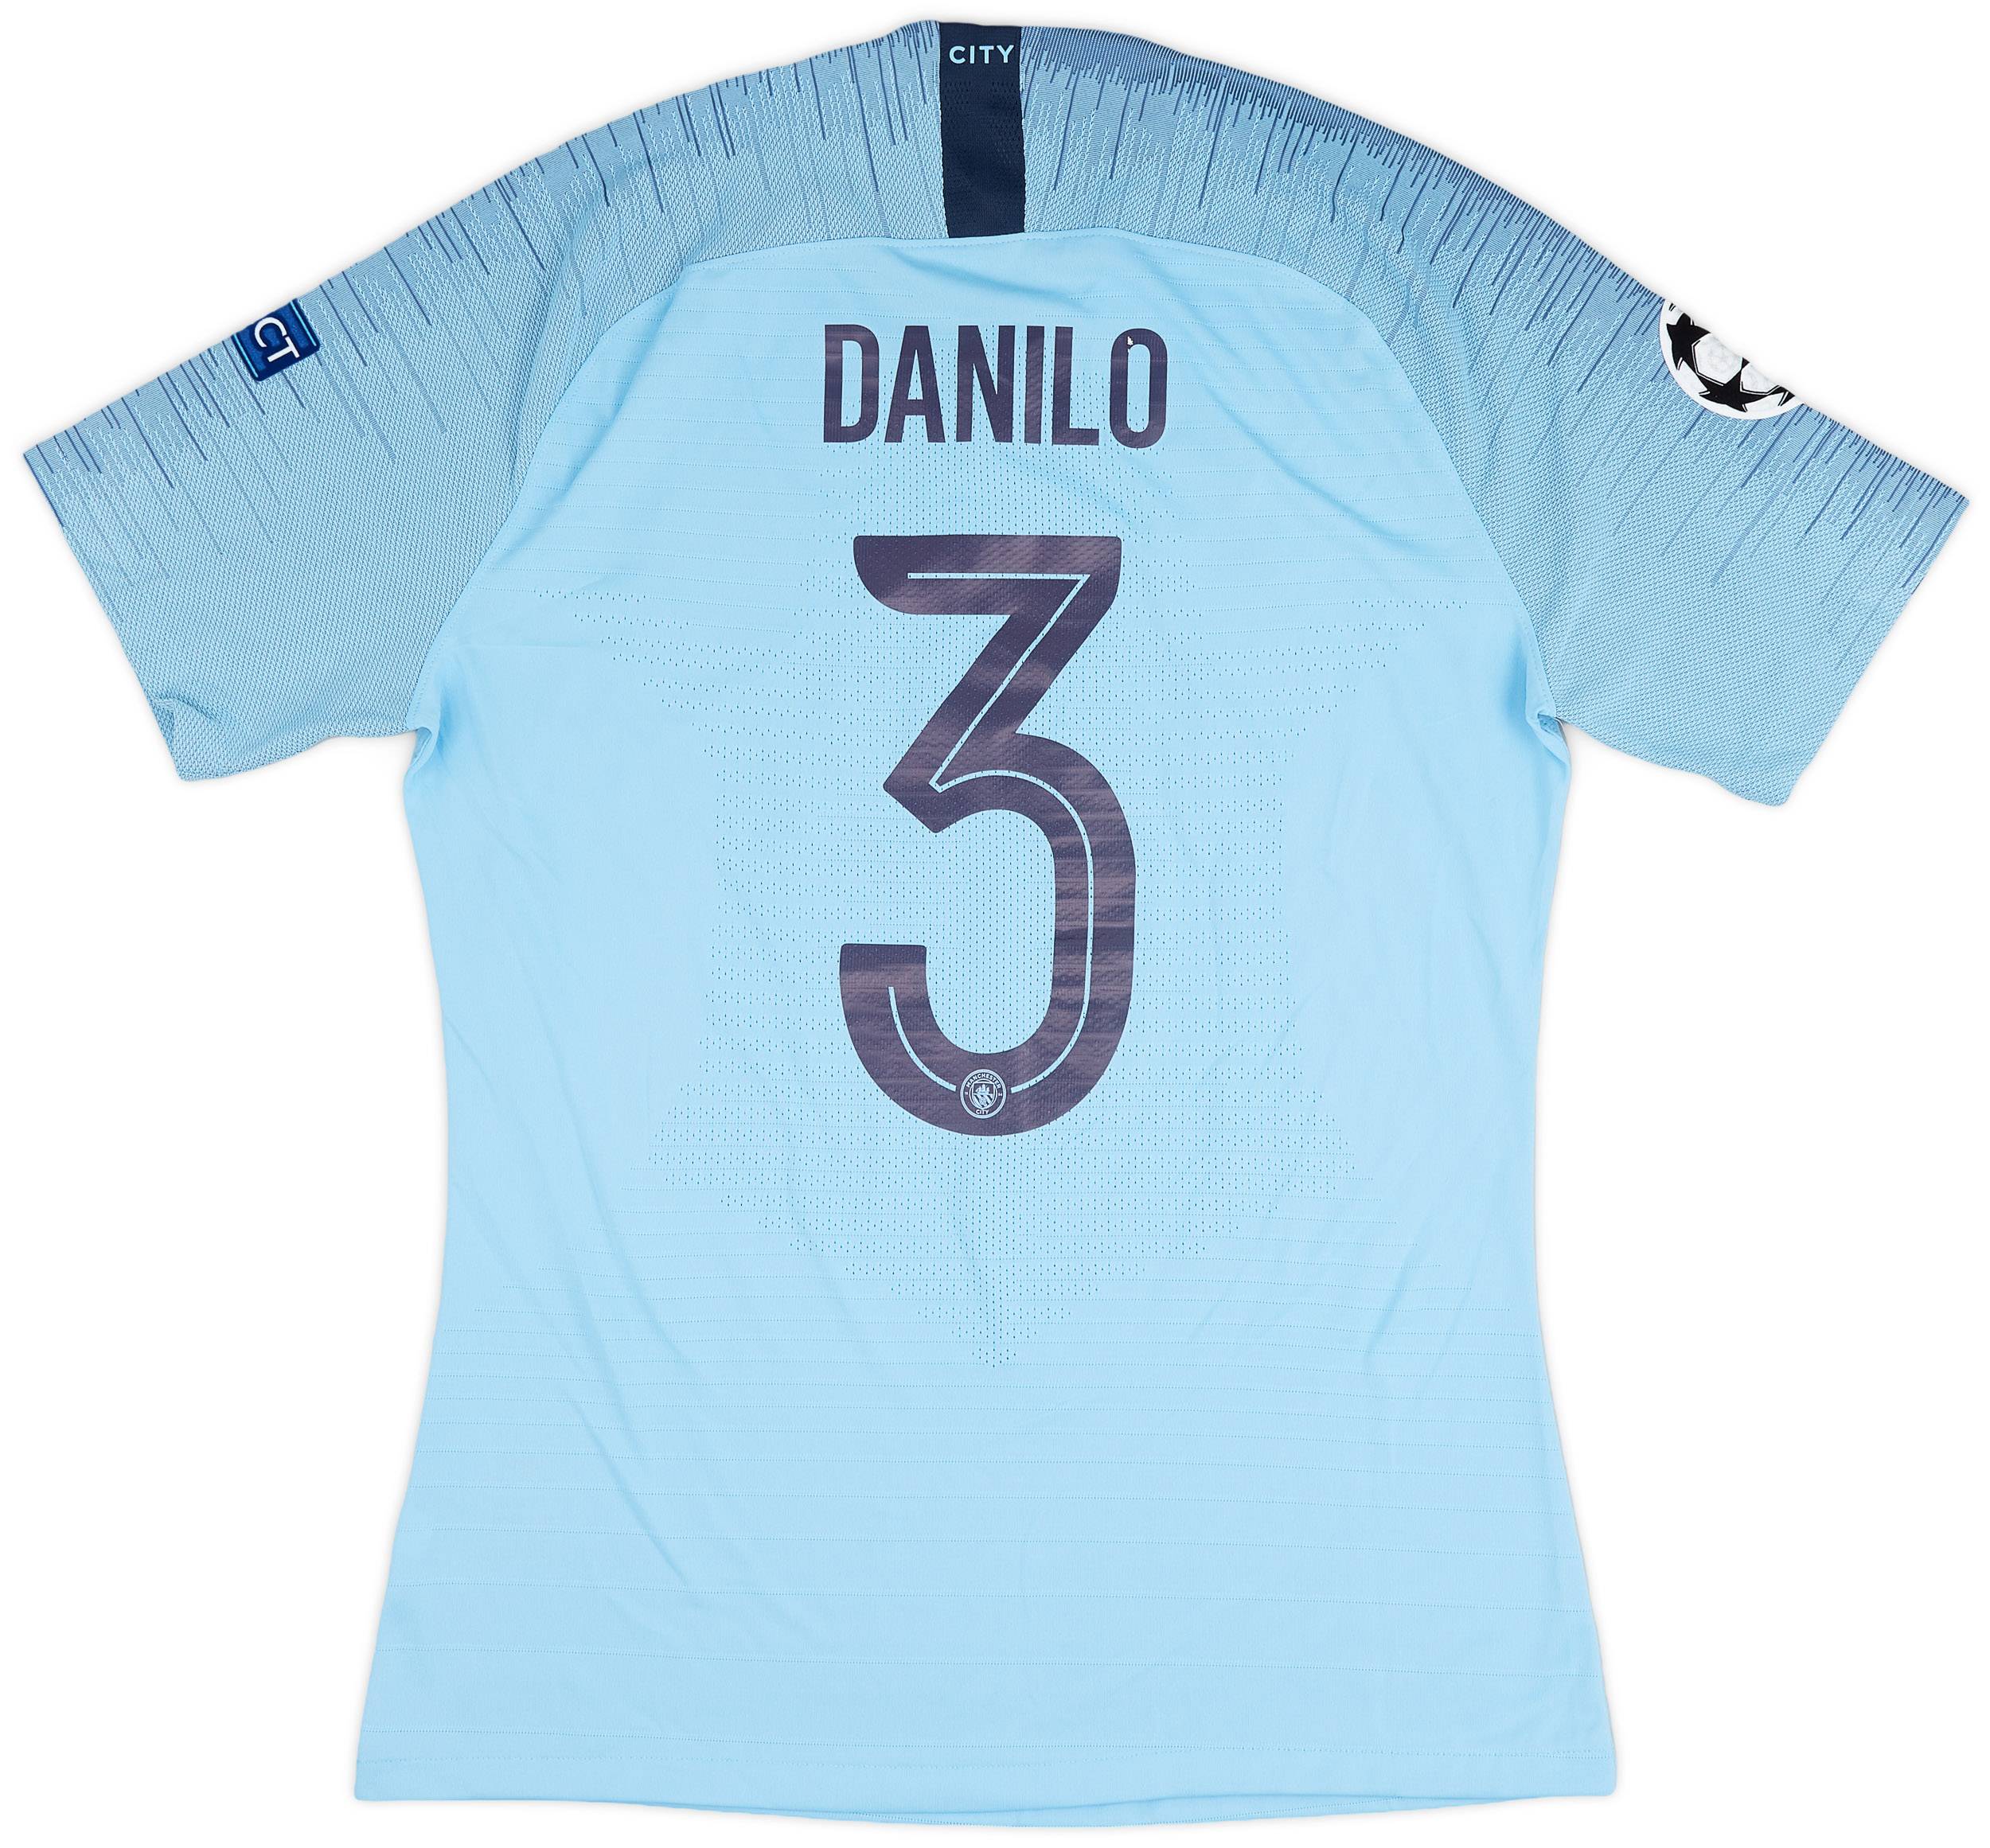 2018-19 Manchester City Player Issue Home Shirt Danilo #3 - 9/10 - (L)